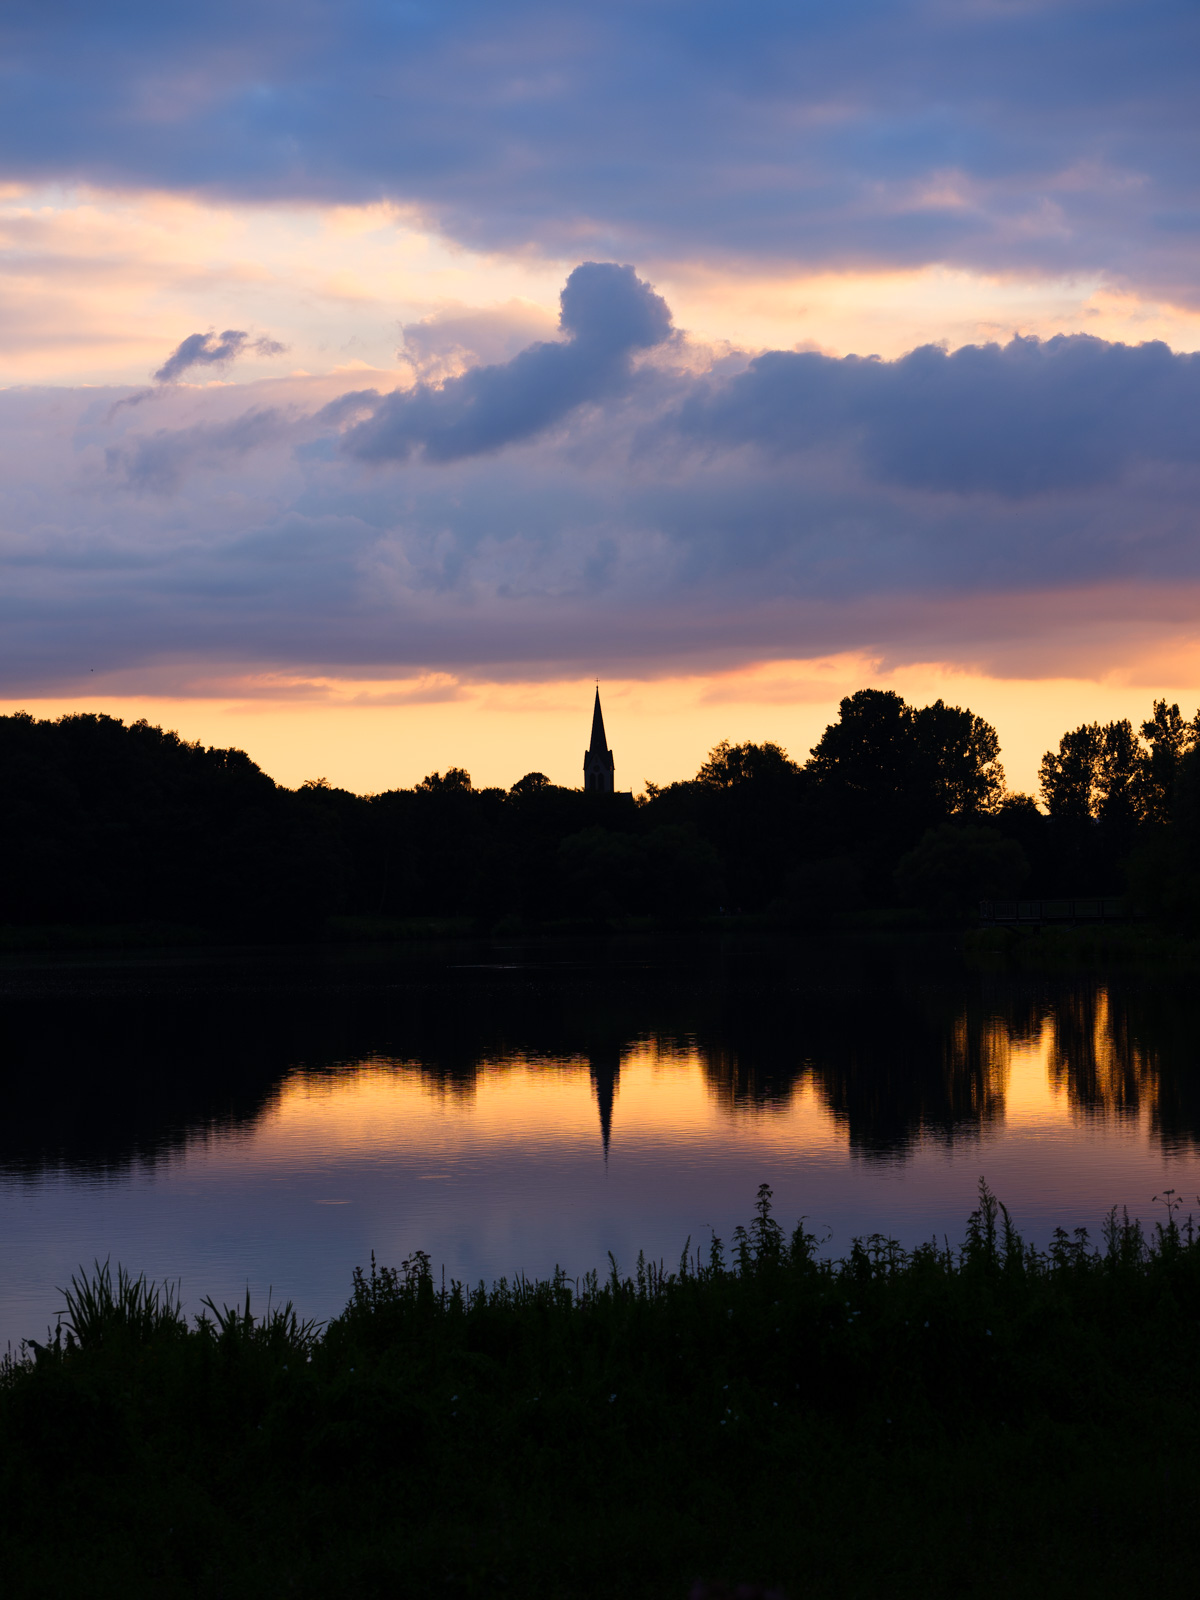 Summer evening at 'Obersee' in July 2020 (Bielefeld, Germany).